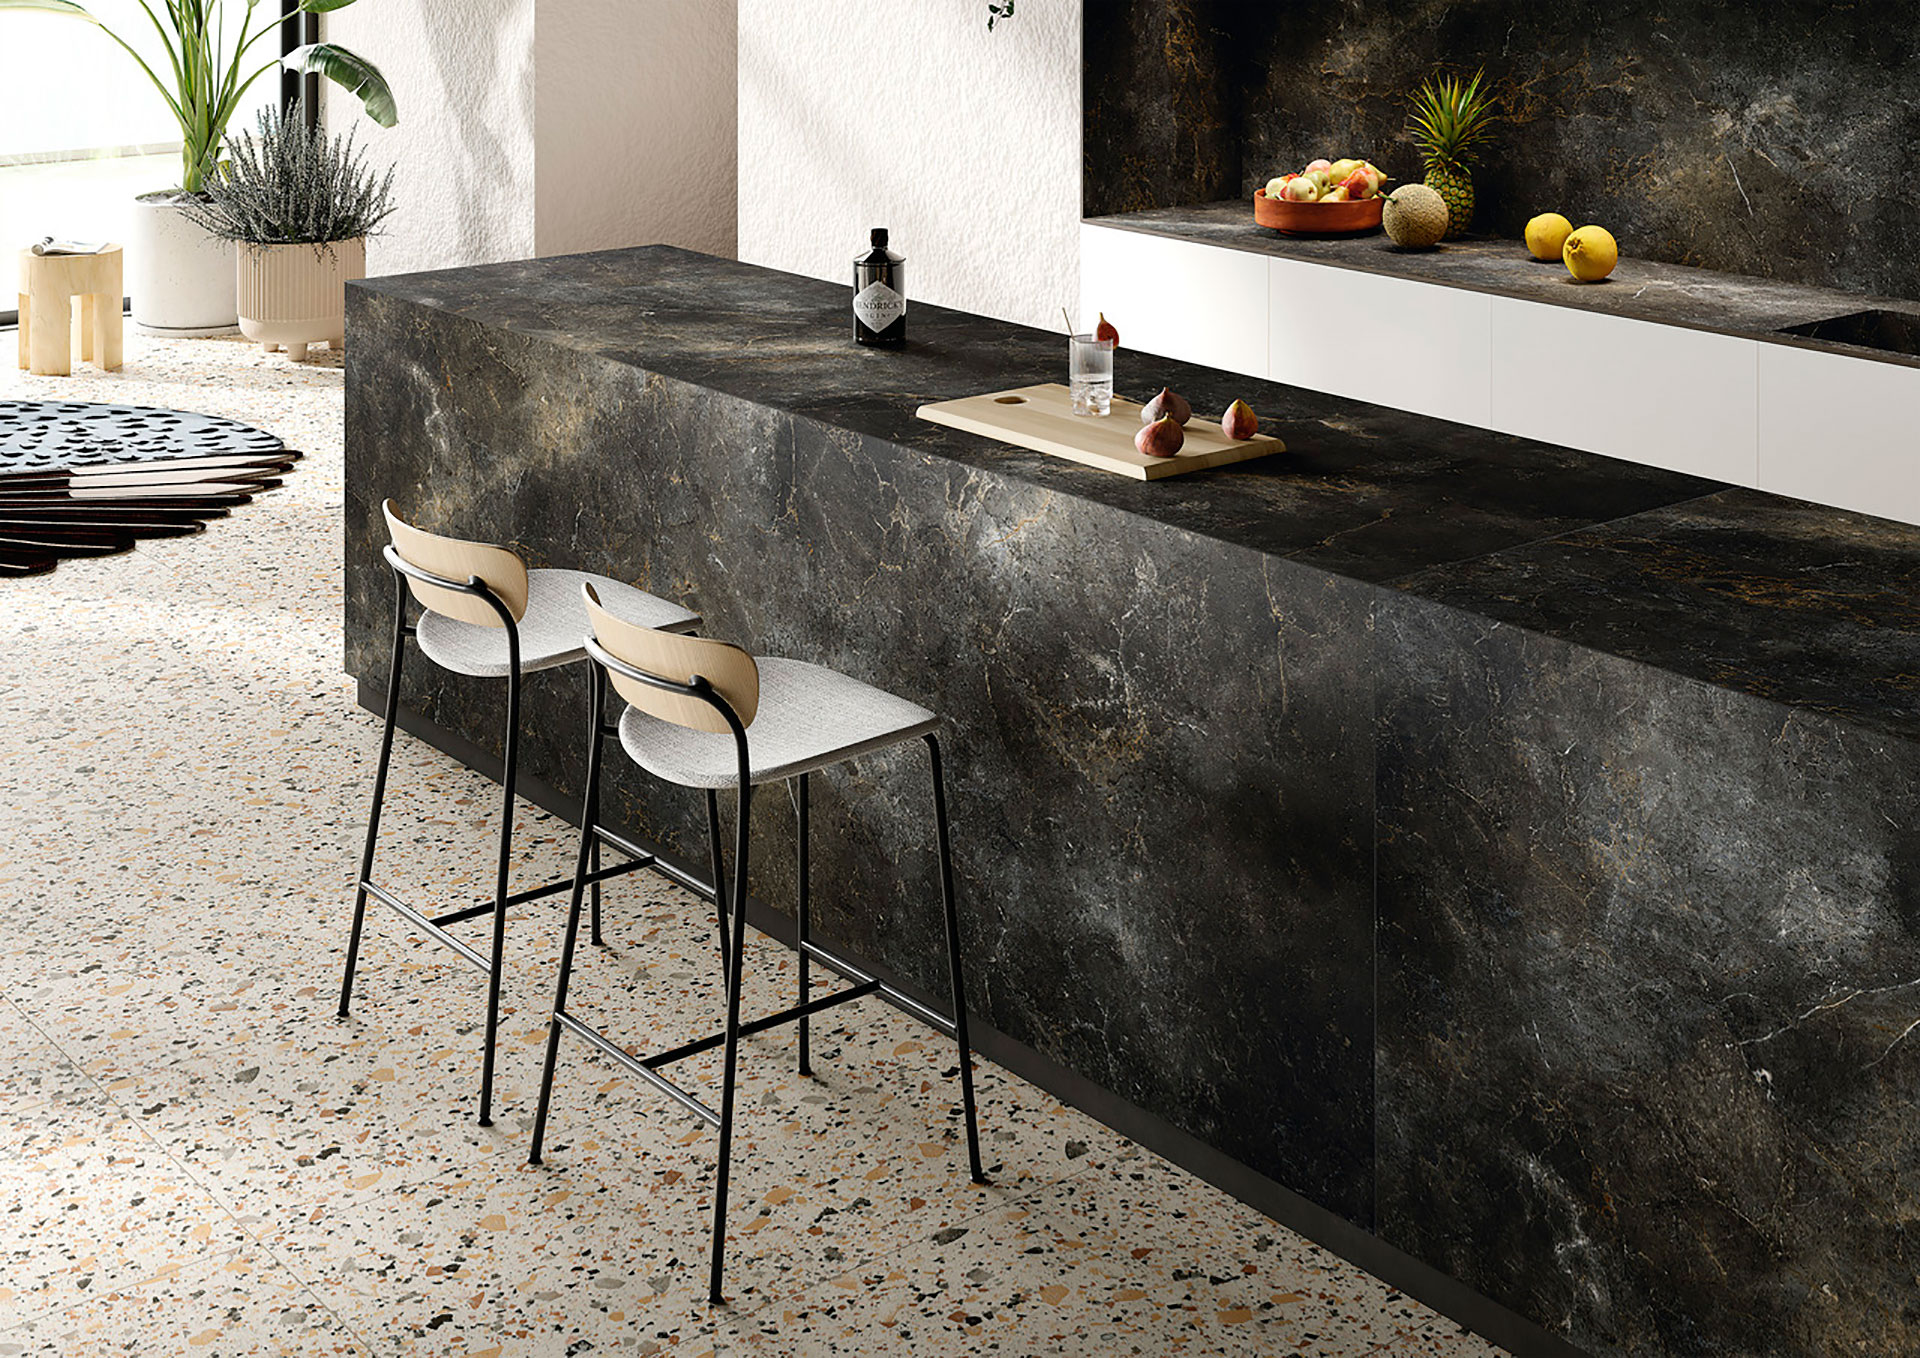 Grand Kitchens - The NX960. The dark front in the ceramic marble